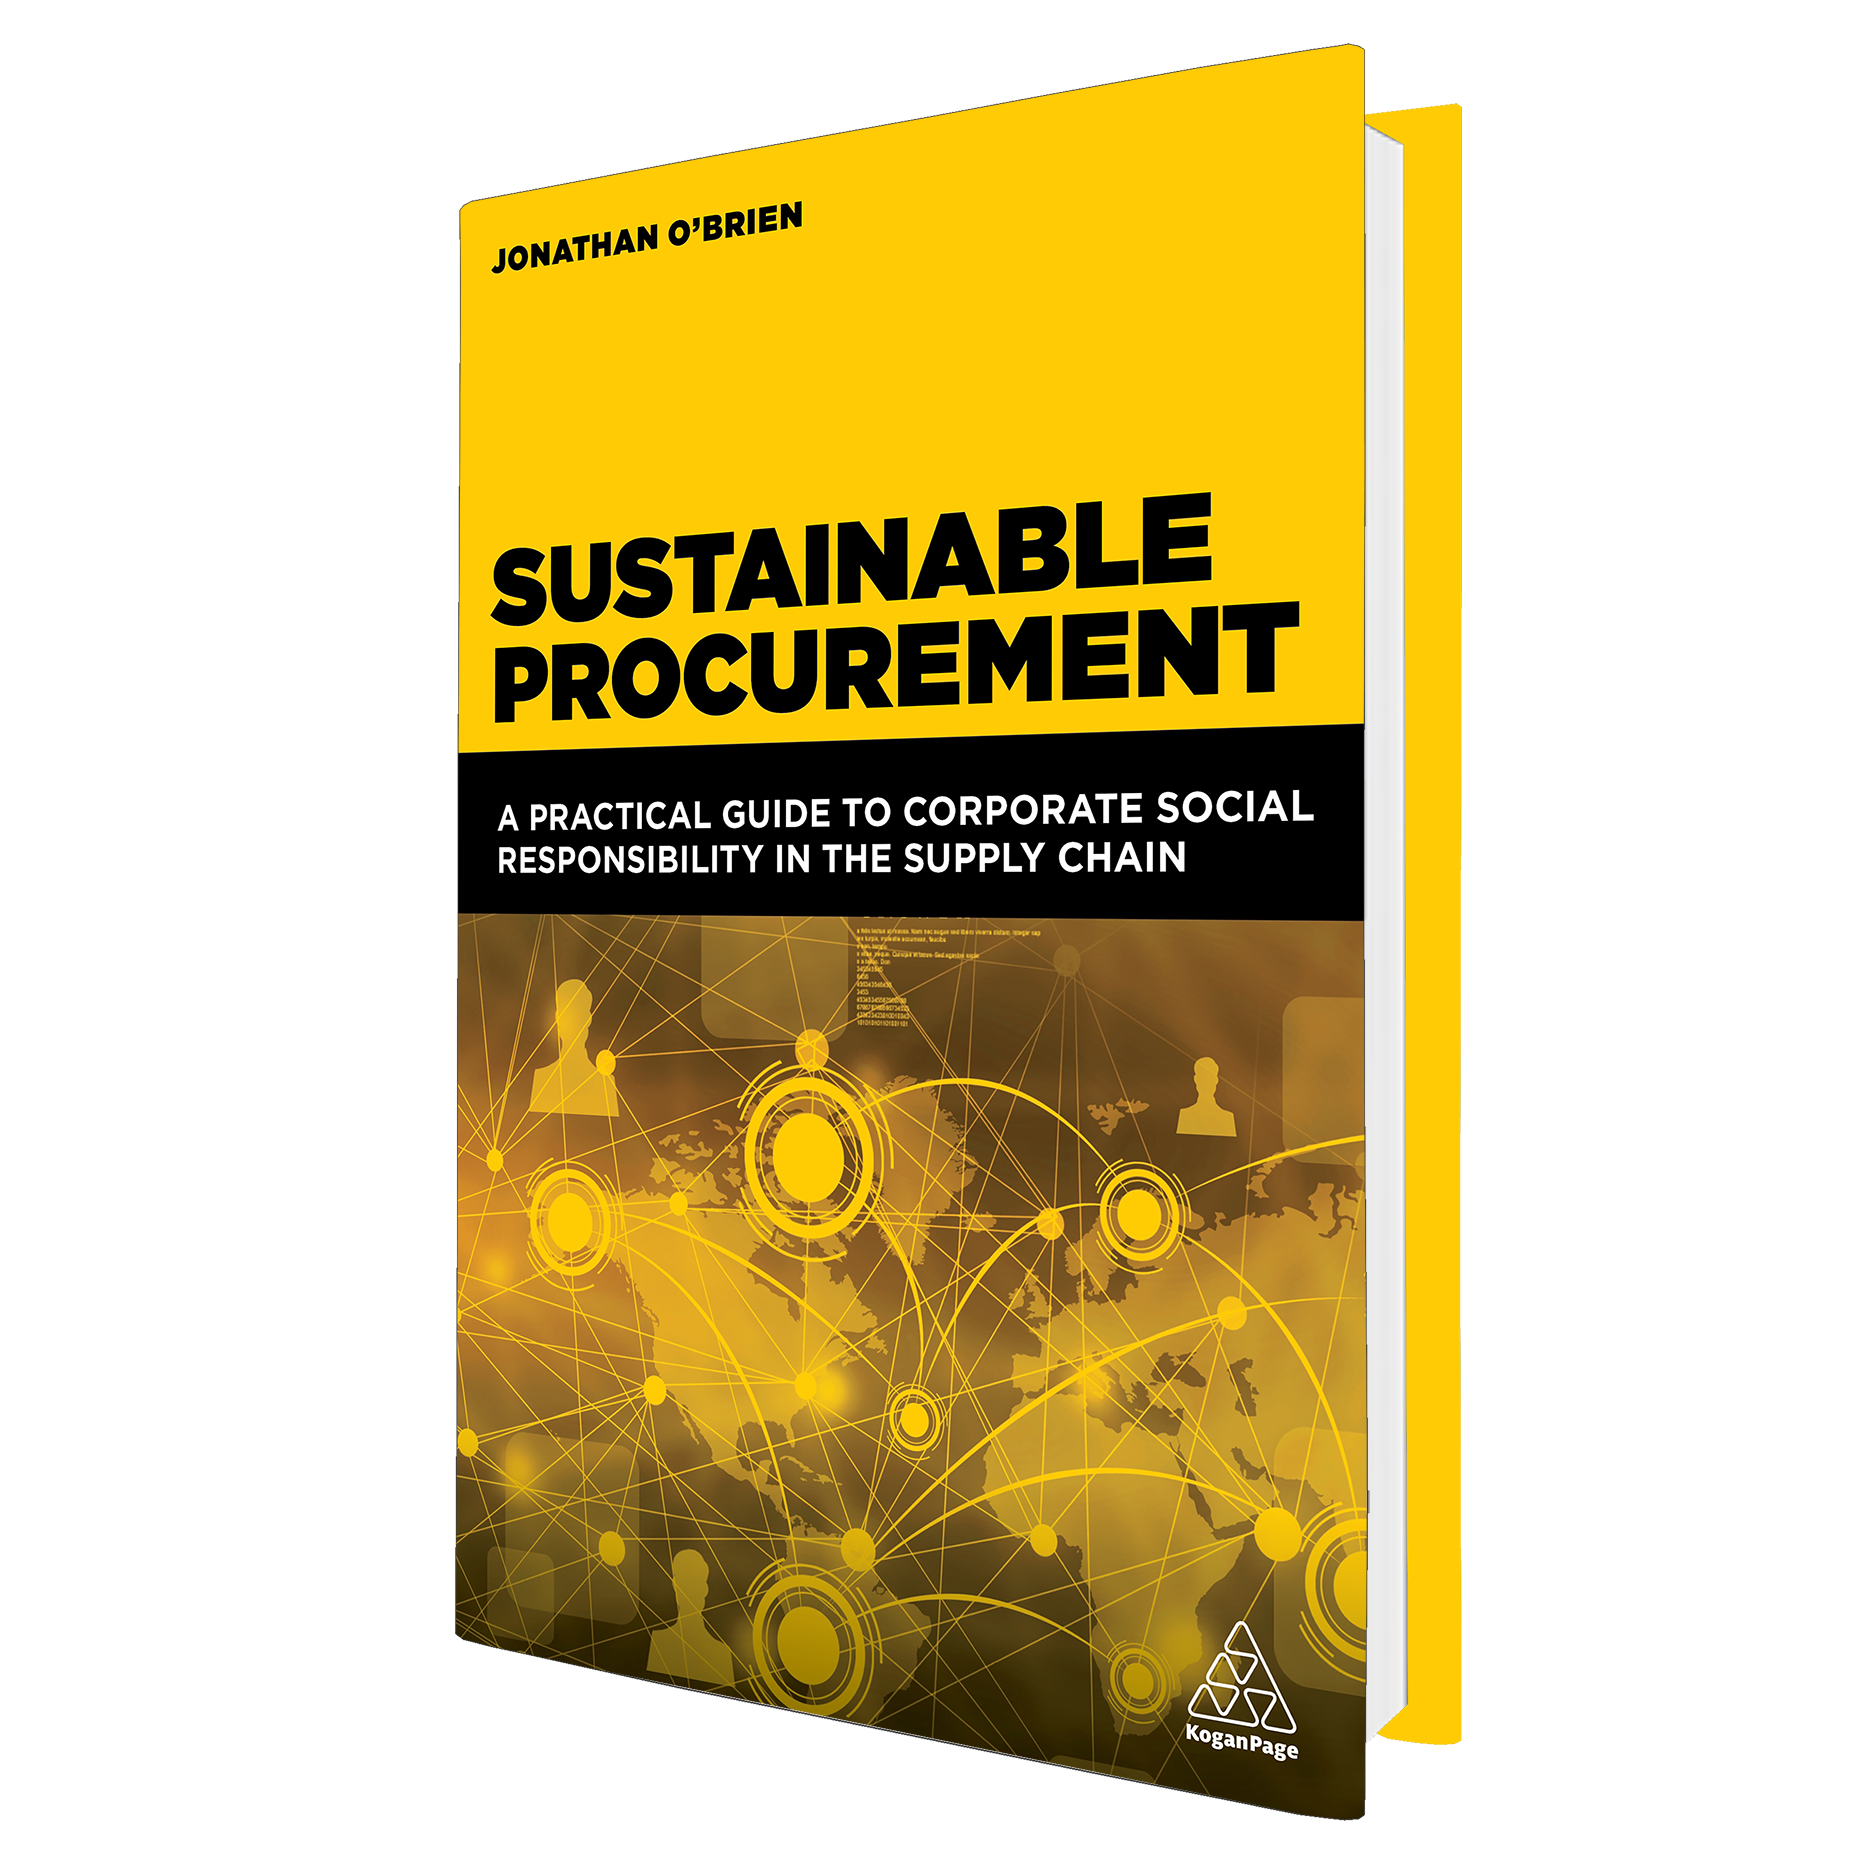 Sustainable-Procurement-Book-Upright-2-1